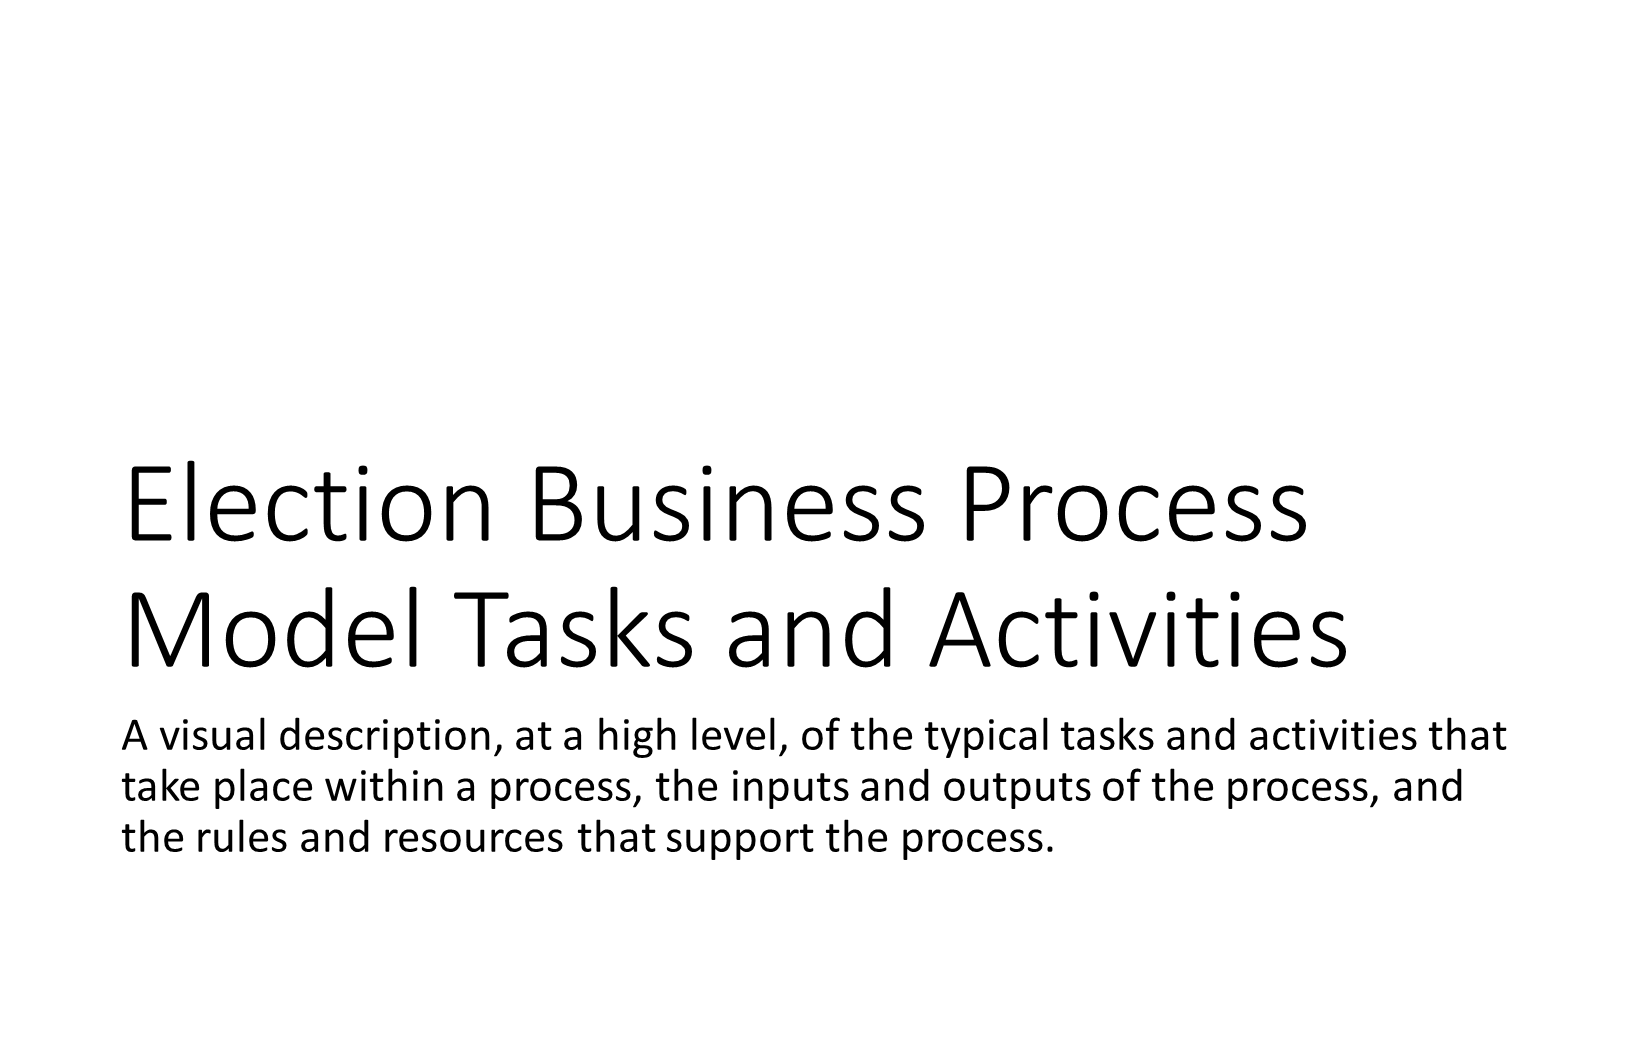 KB Process: Election Business Process Model Tasks and Activities